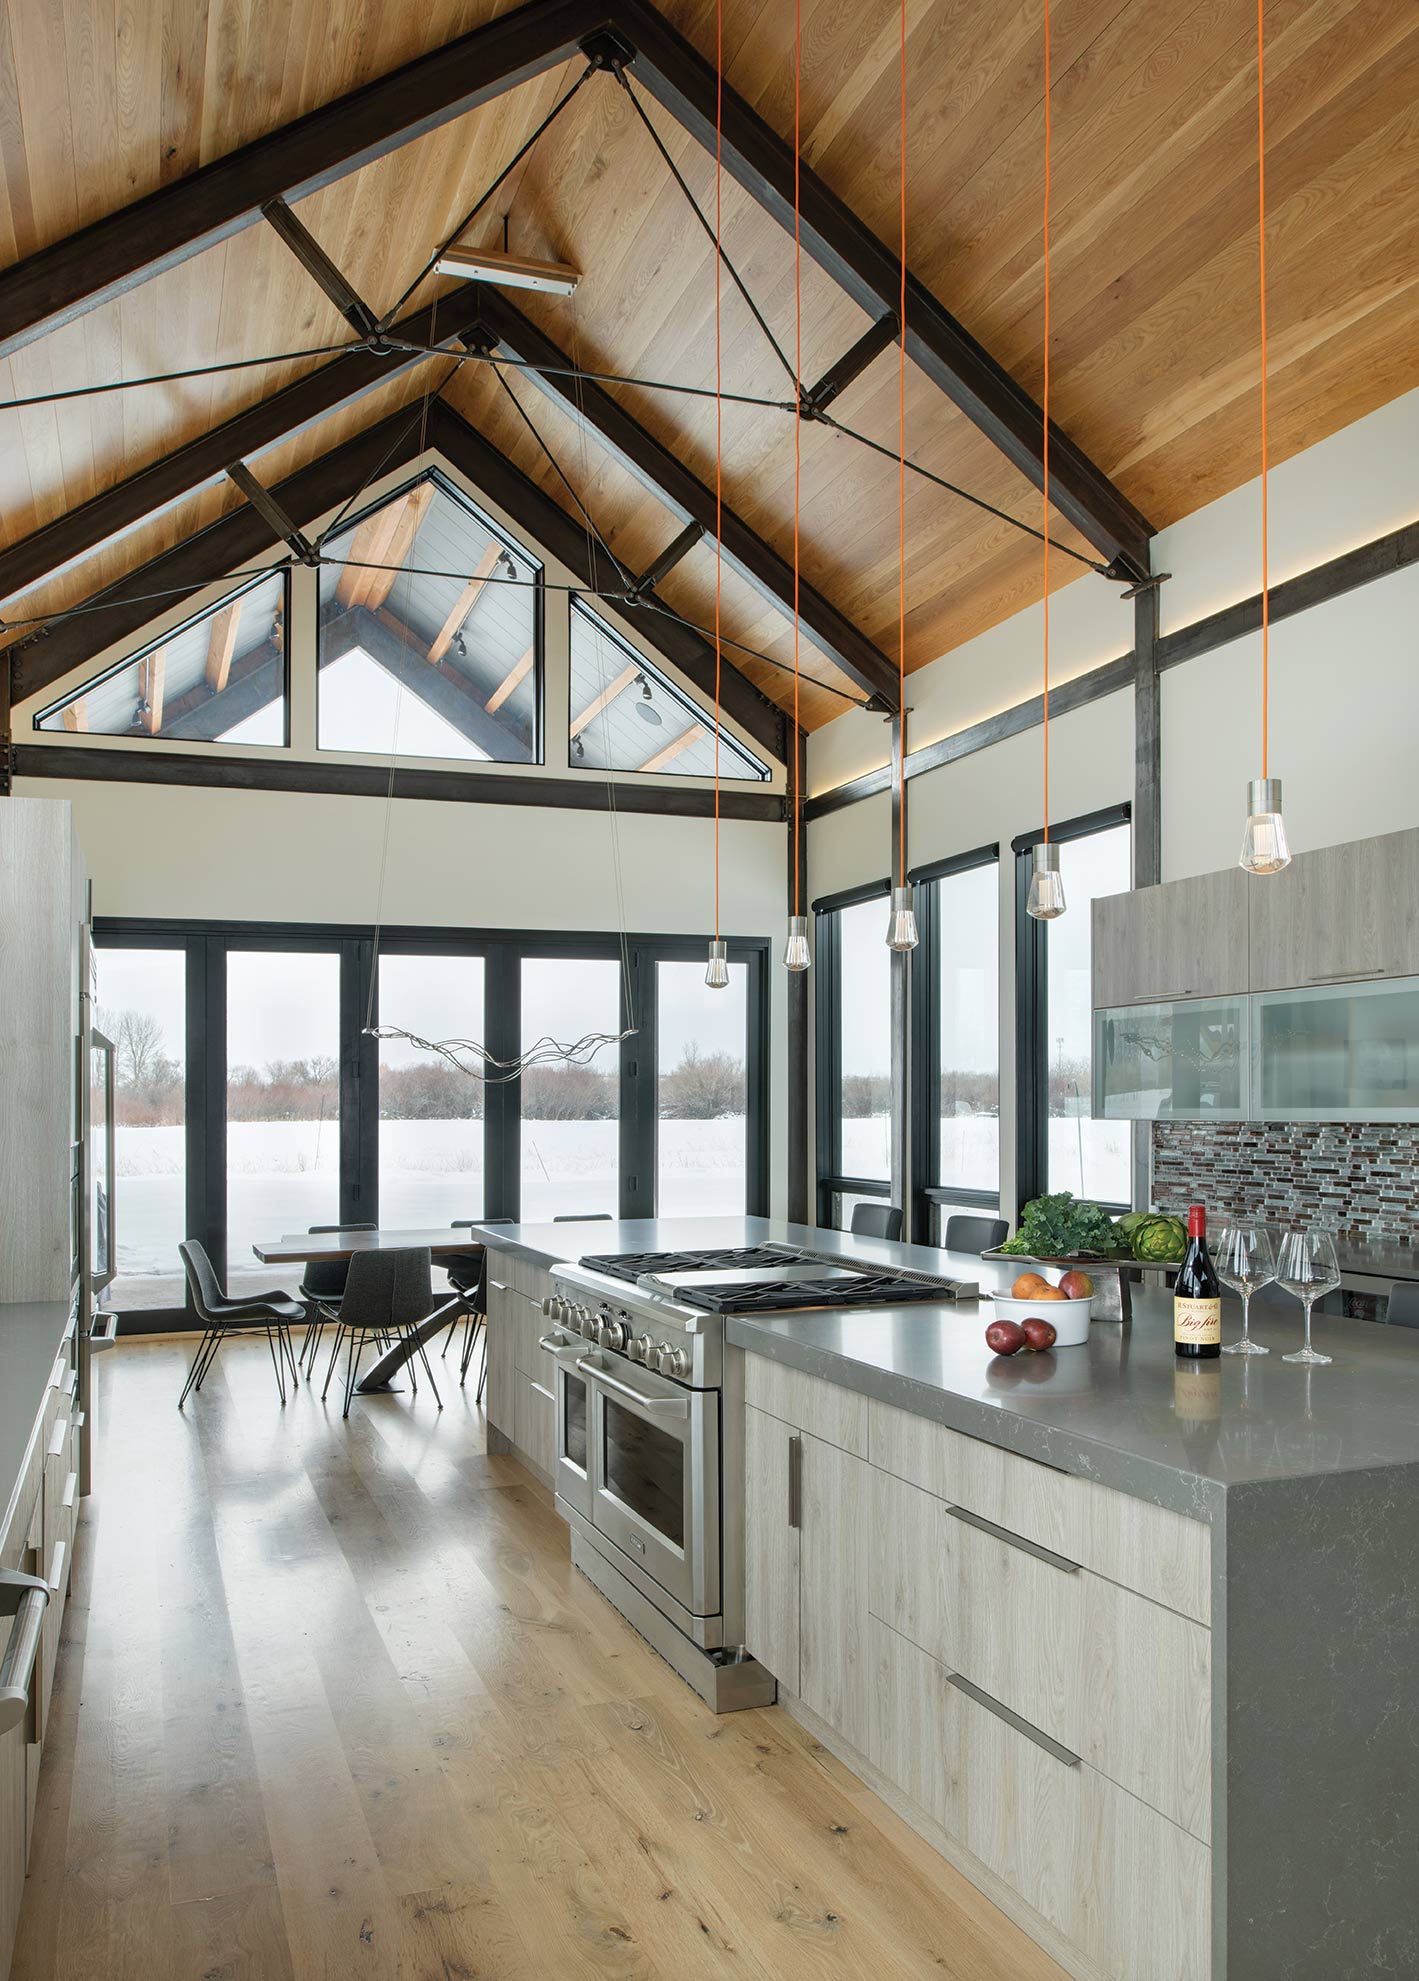 Modern kitchen with vaulted ceilings, a large island, and a wall of windows